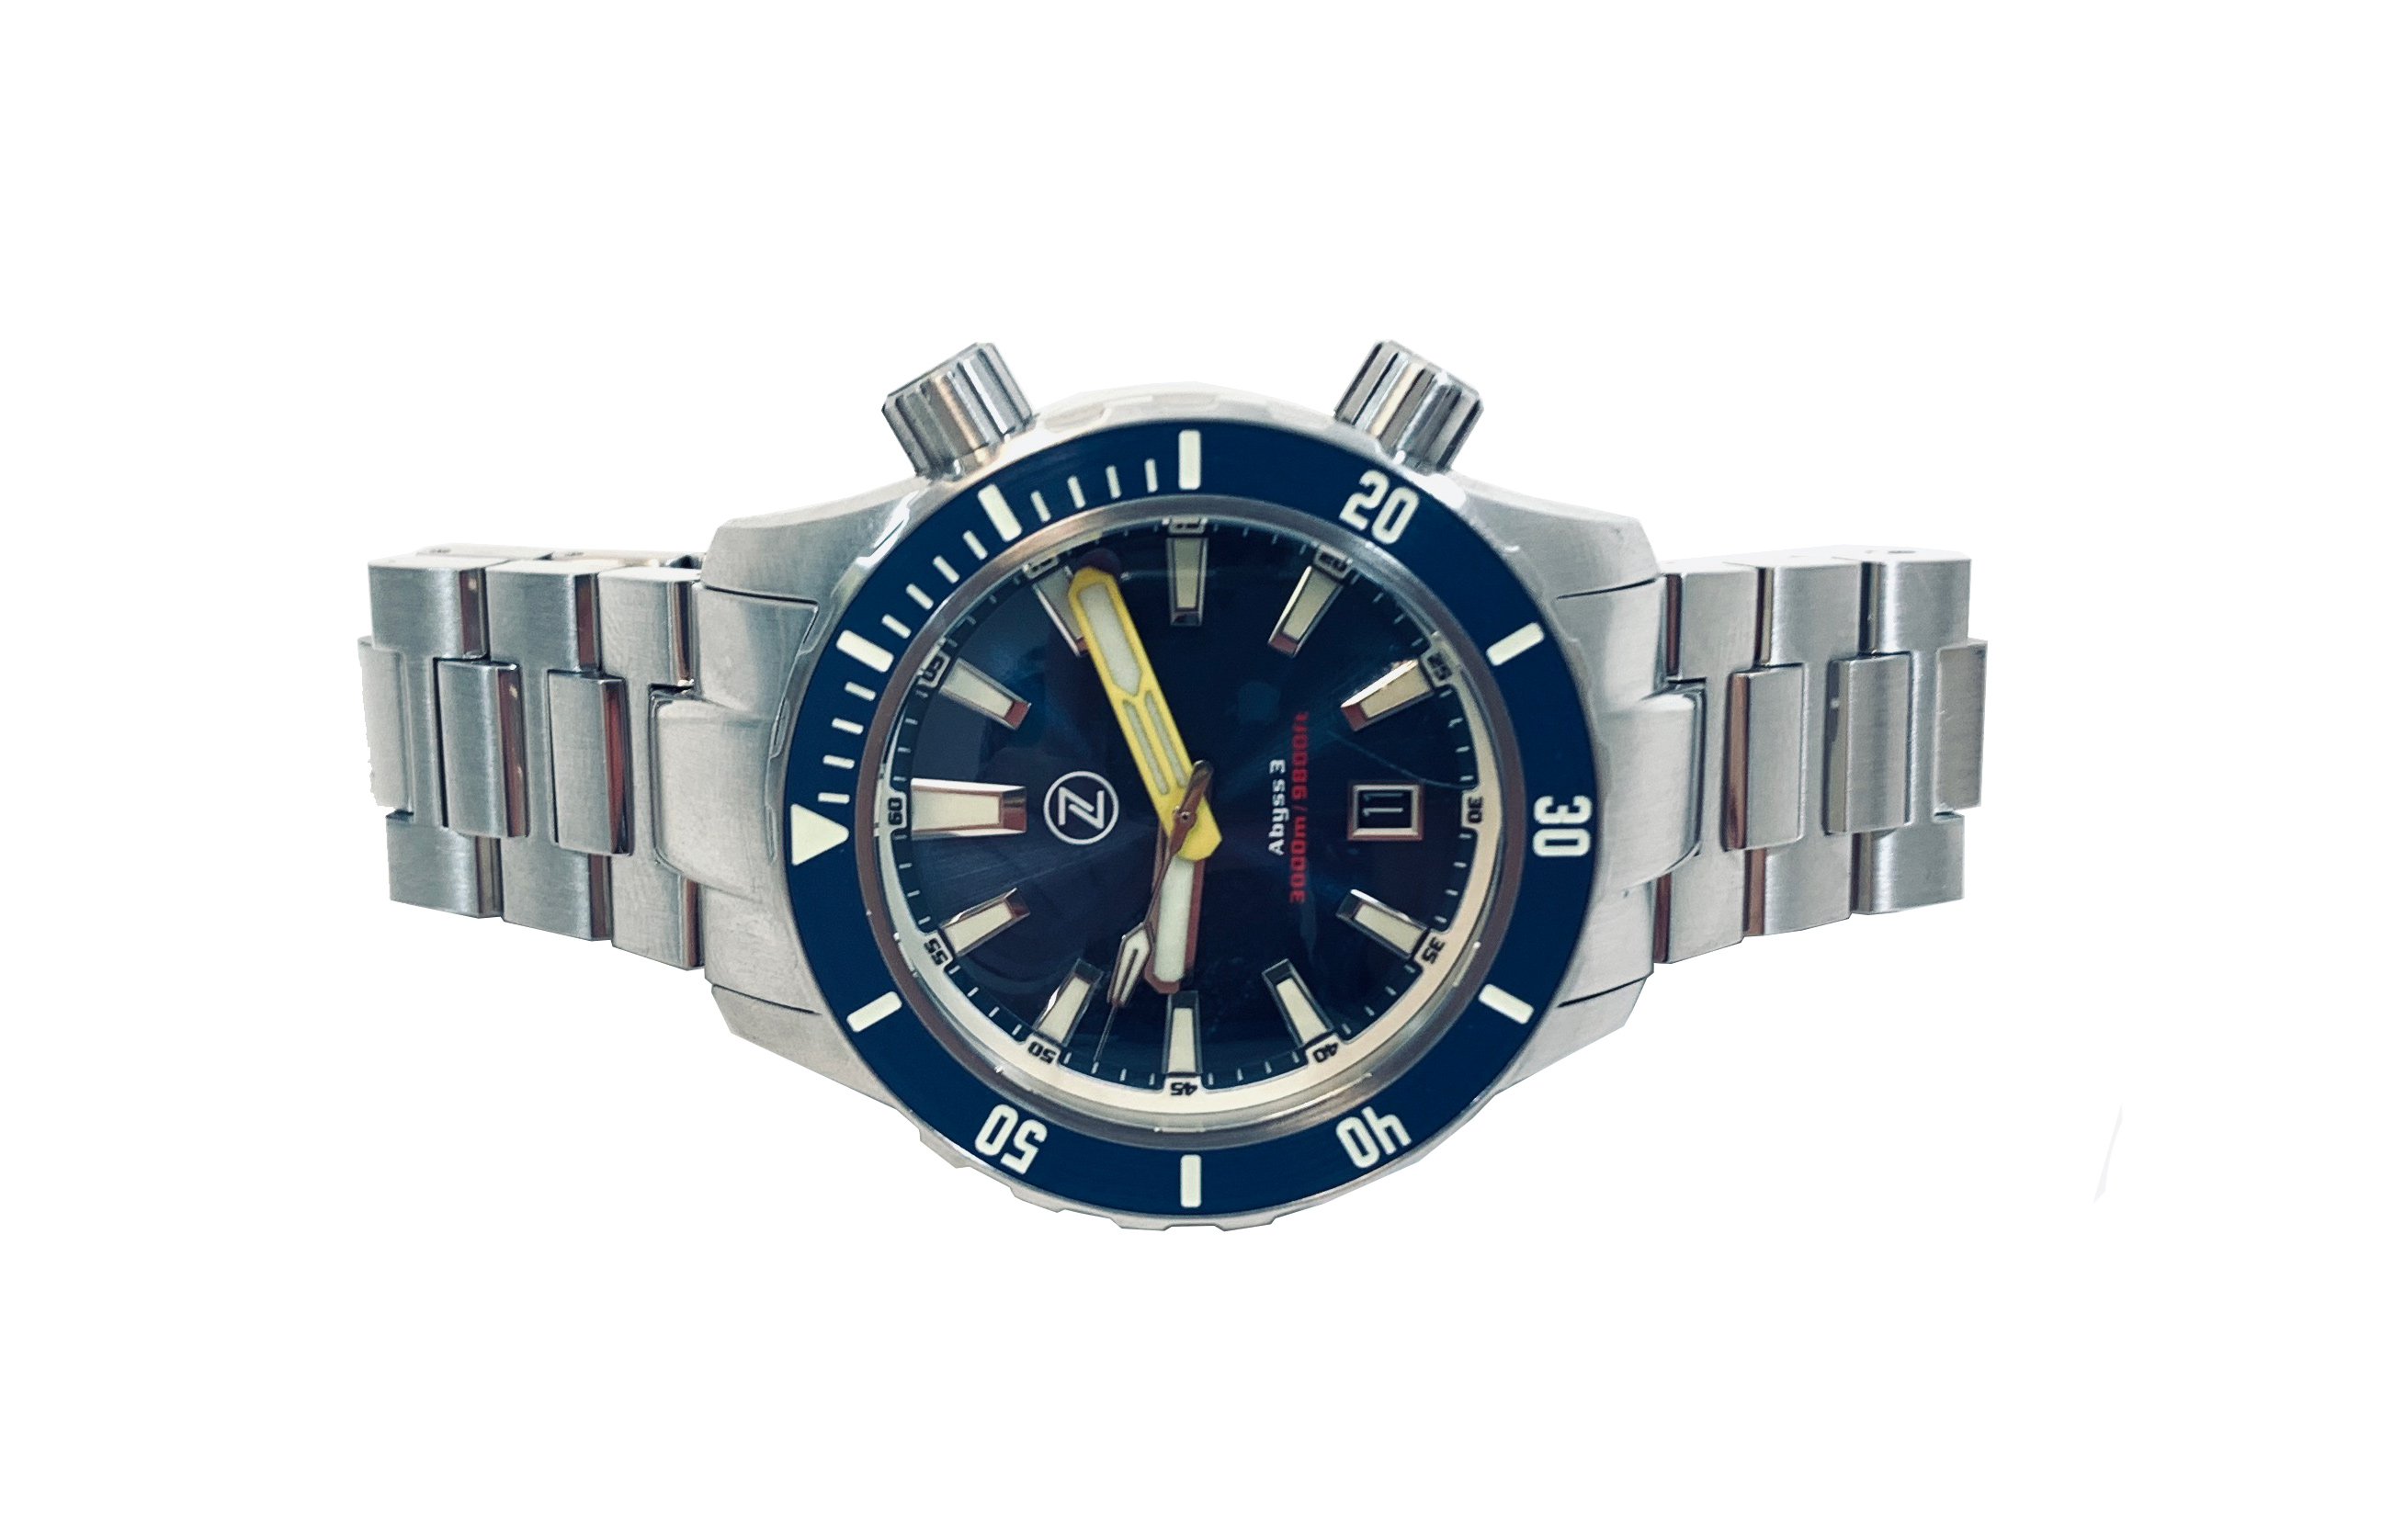 Zelos Abyss 3 3000M Steel Midnight Blue Ceramic Bezel 43mm Yellow hands Limited Edition Automatic Diver Watch